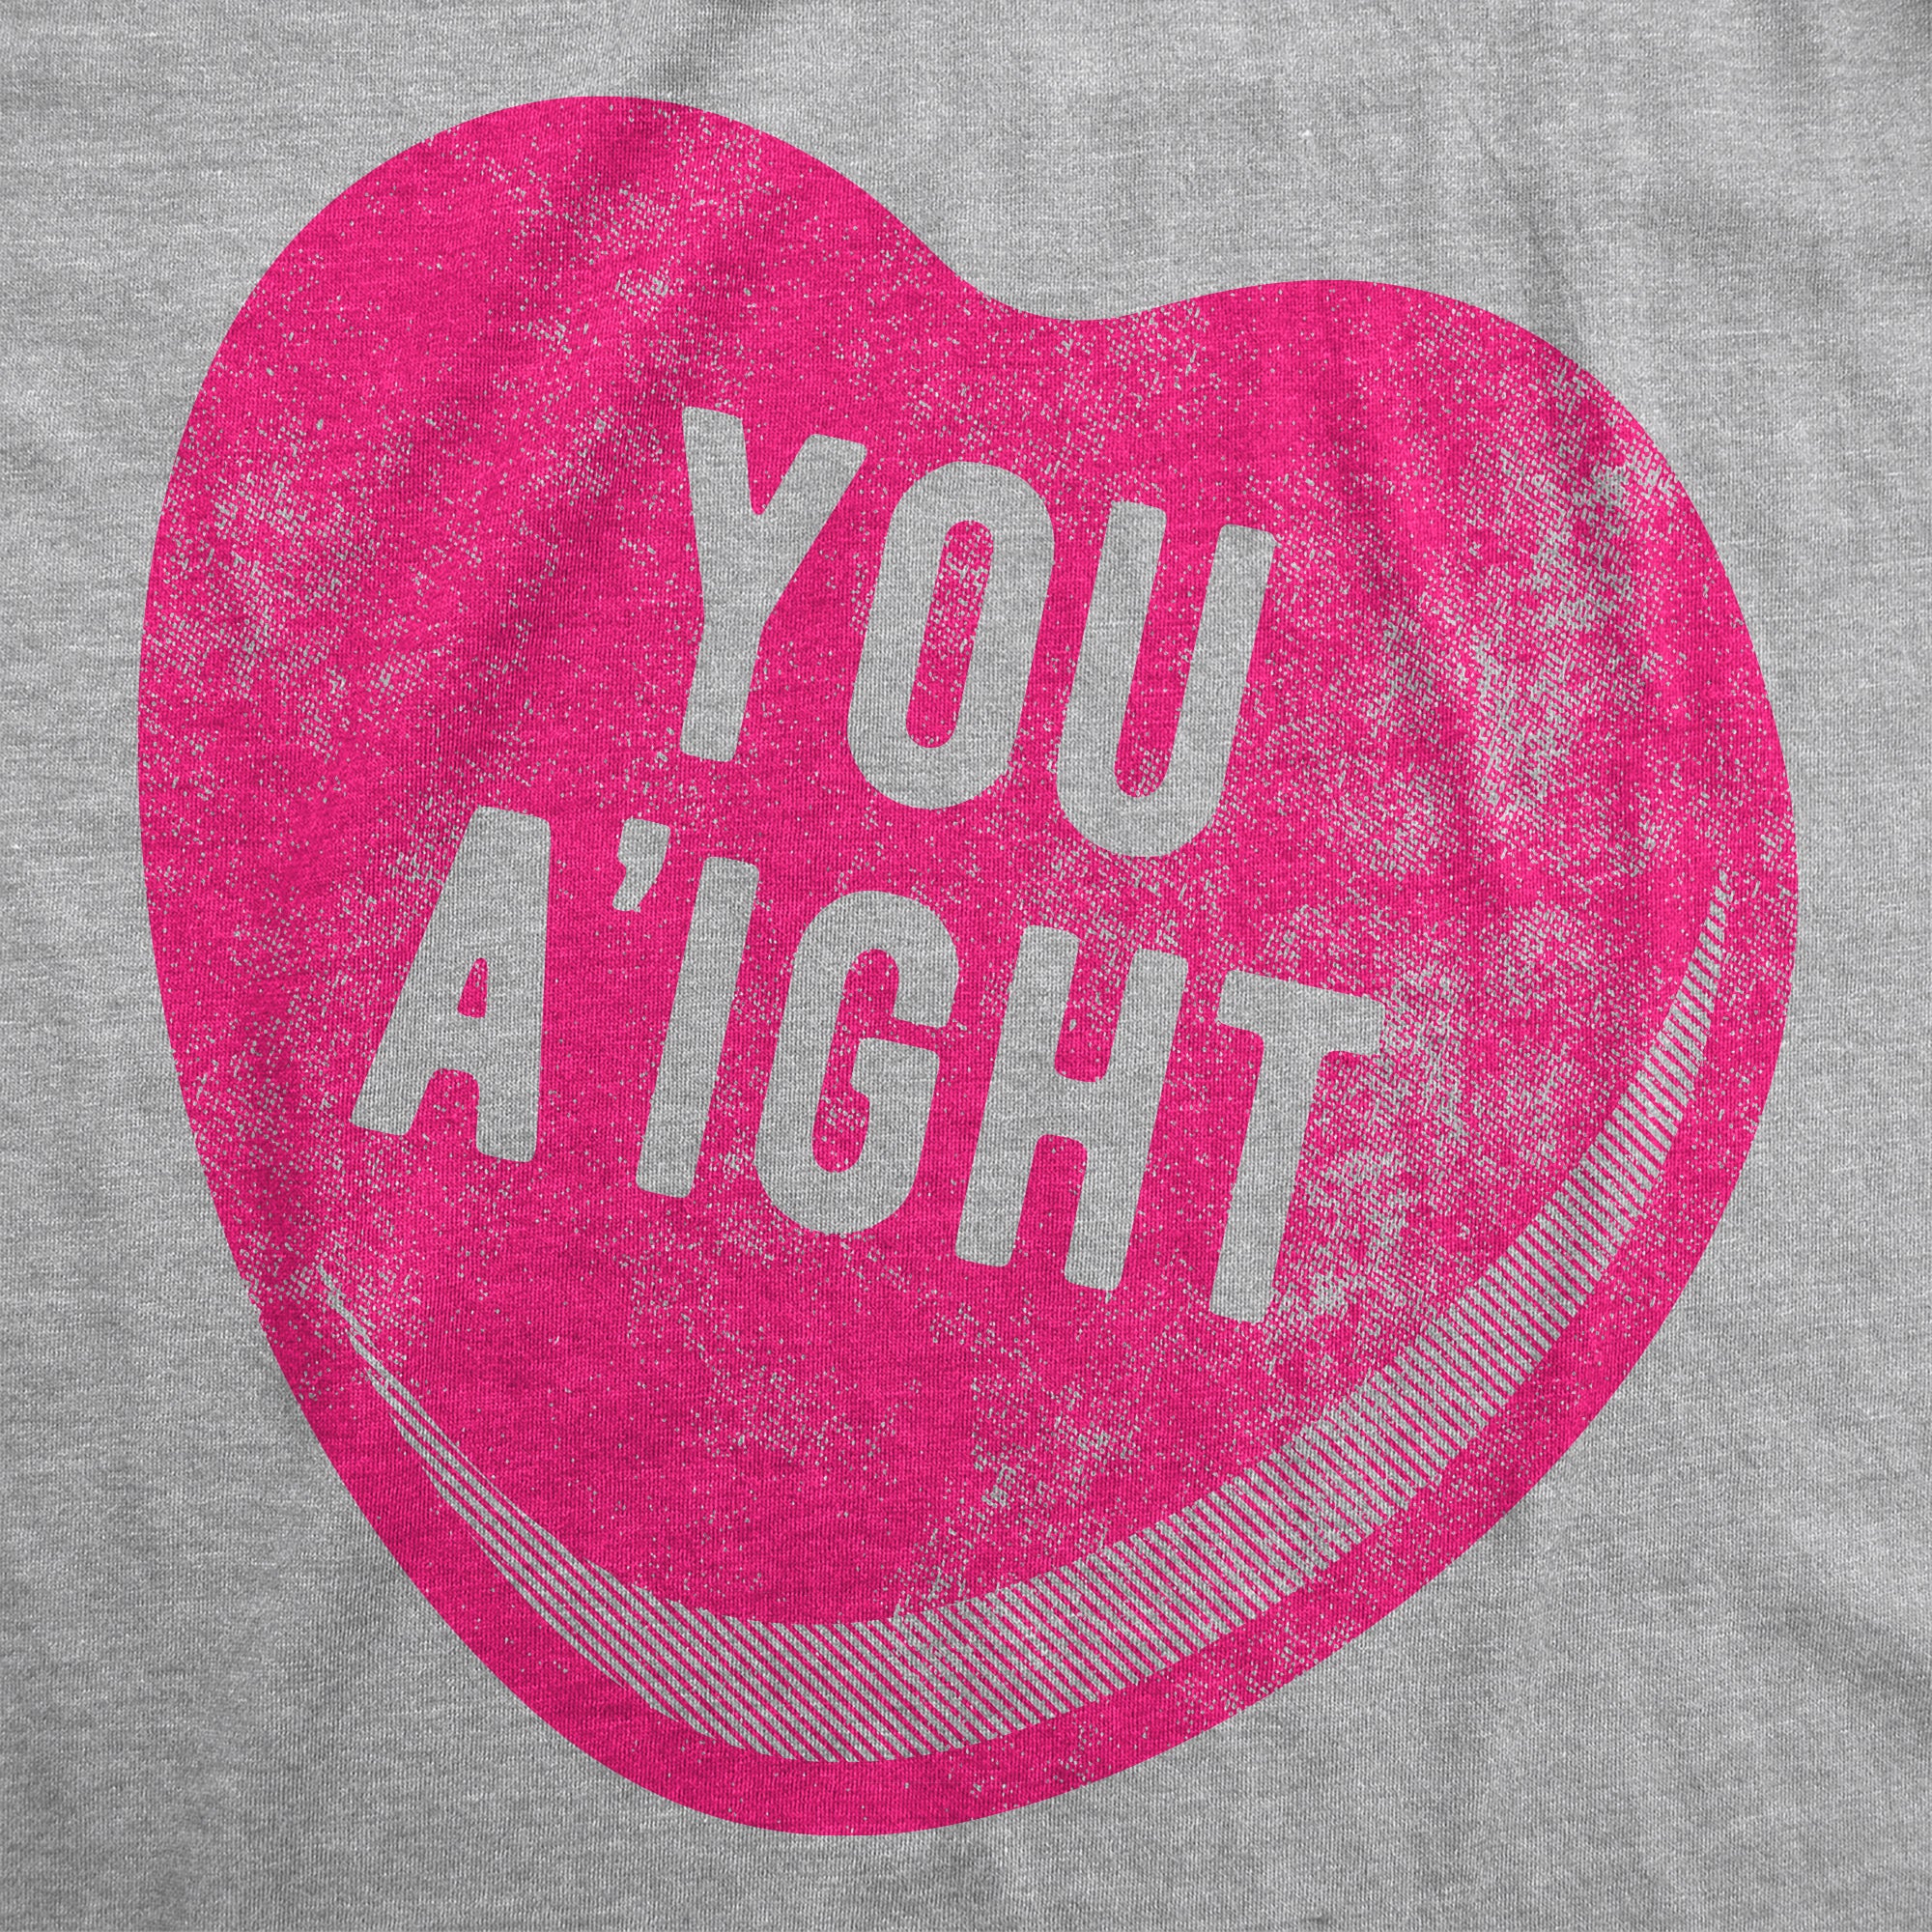 Funny Light Heather Grey - You Aight You Aight Mens T Shirt Nerdy Valentine's Day Sarcastic Tee